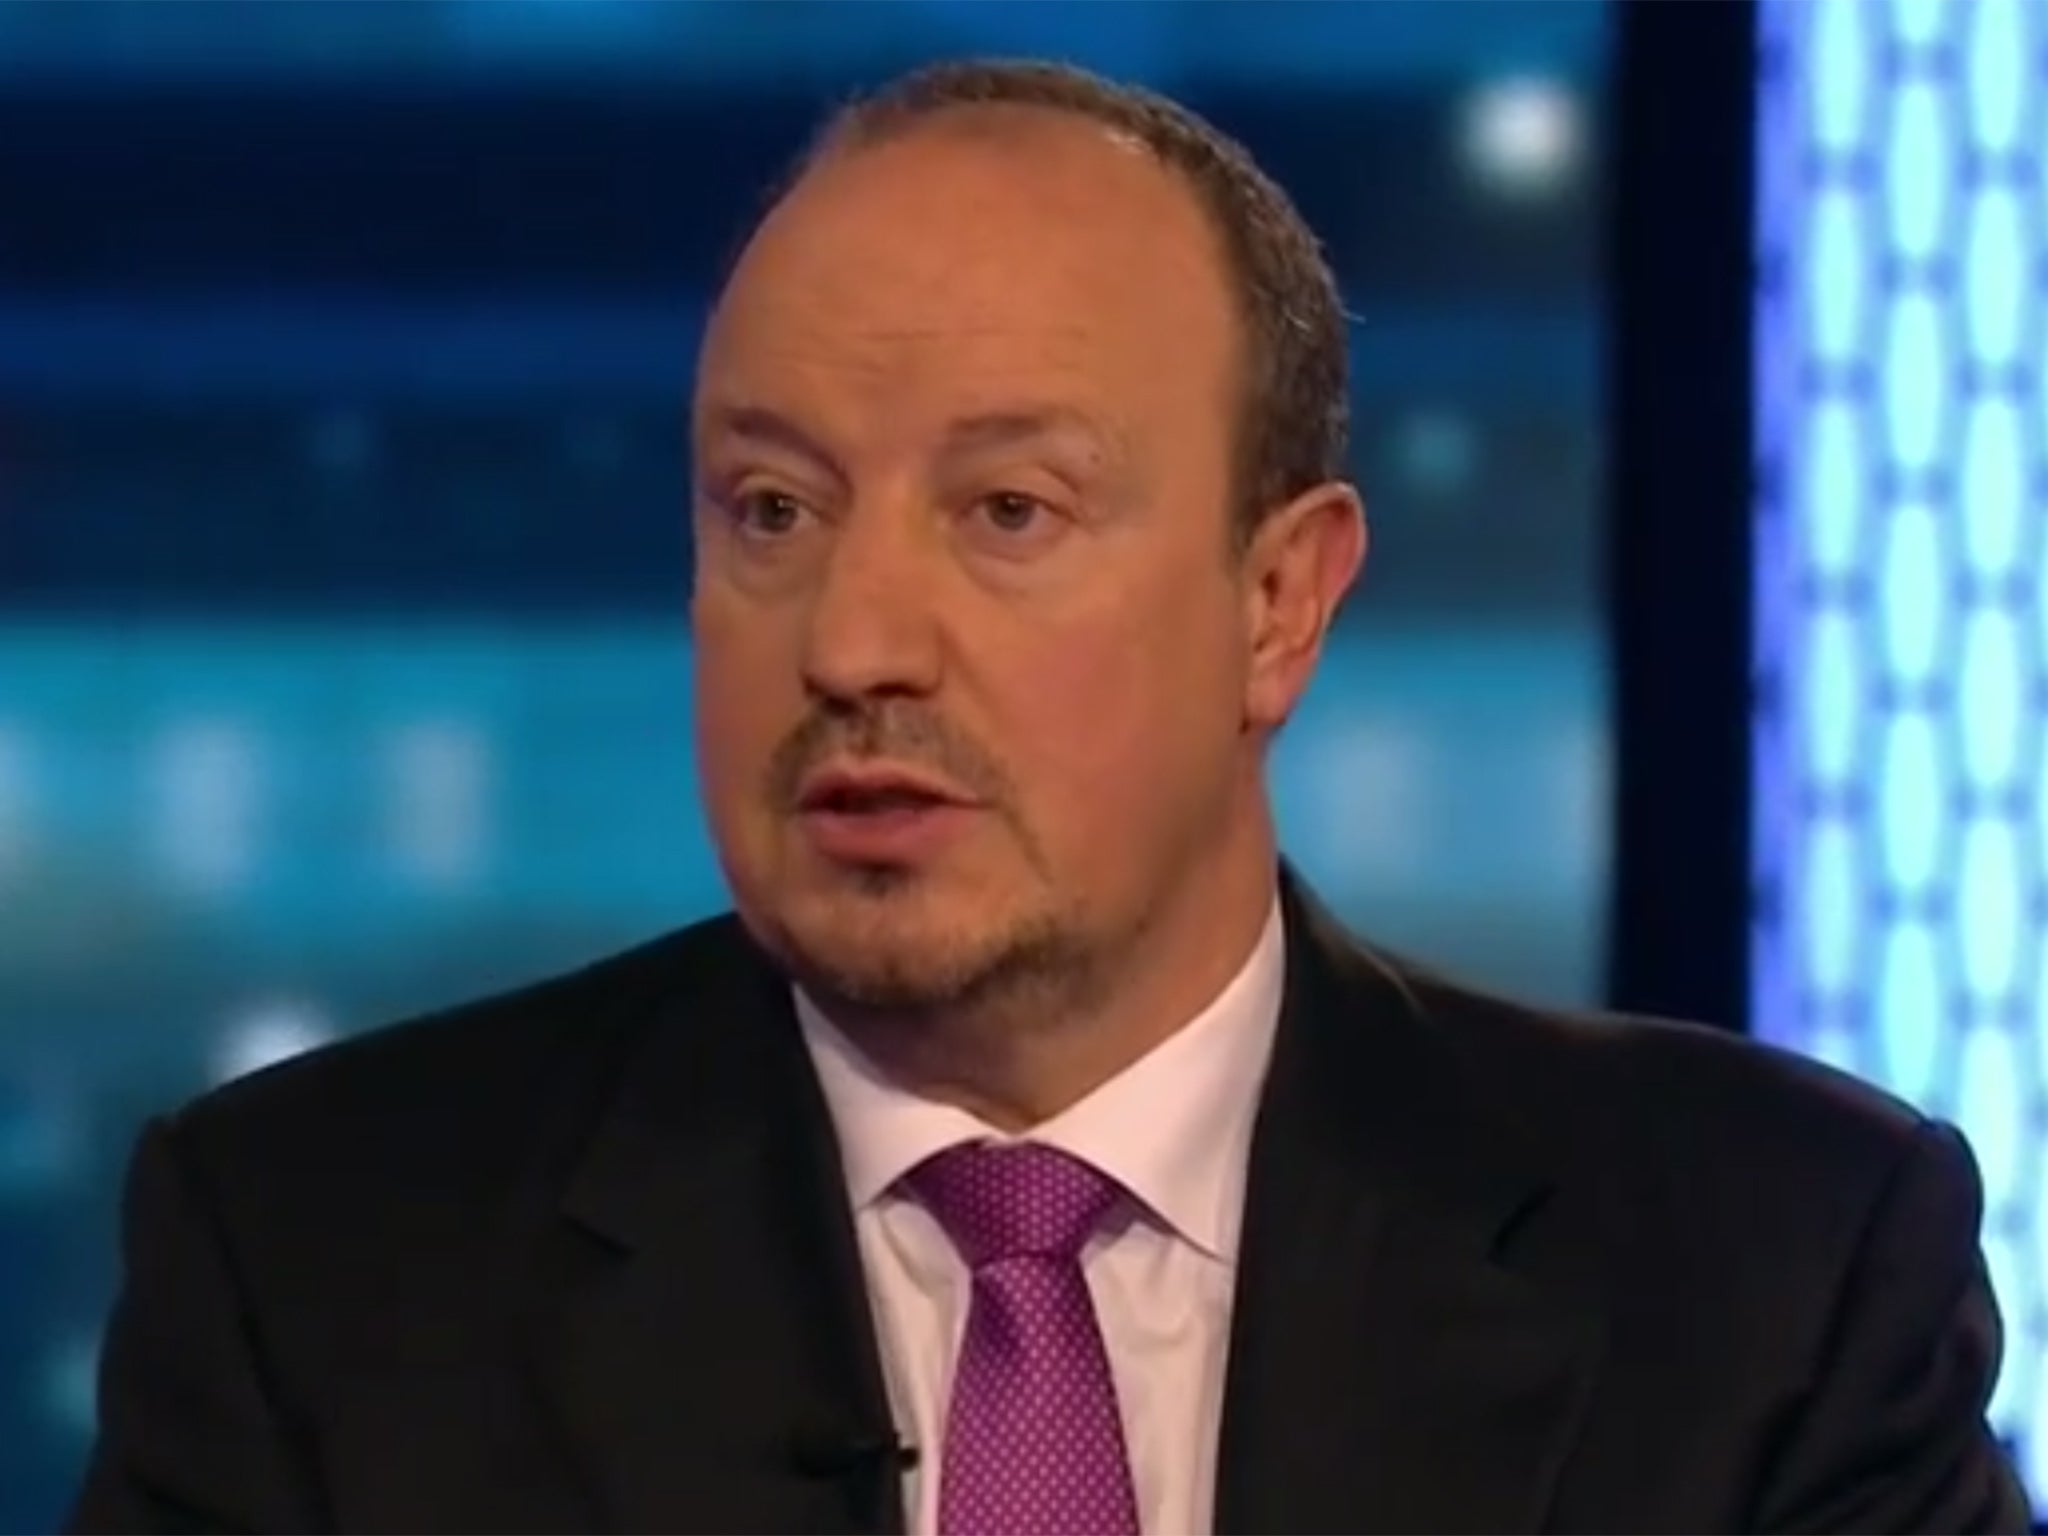 Former Liverpool and Real Madrid manager Rafael Benitez